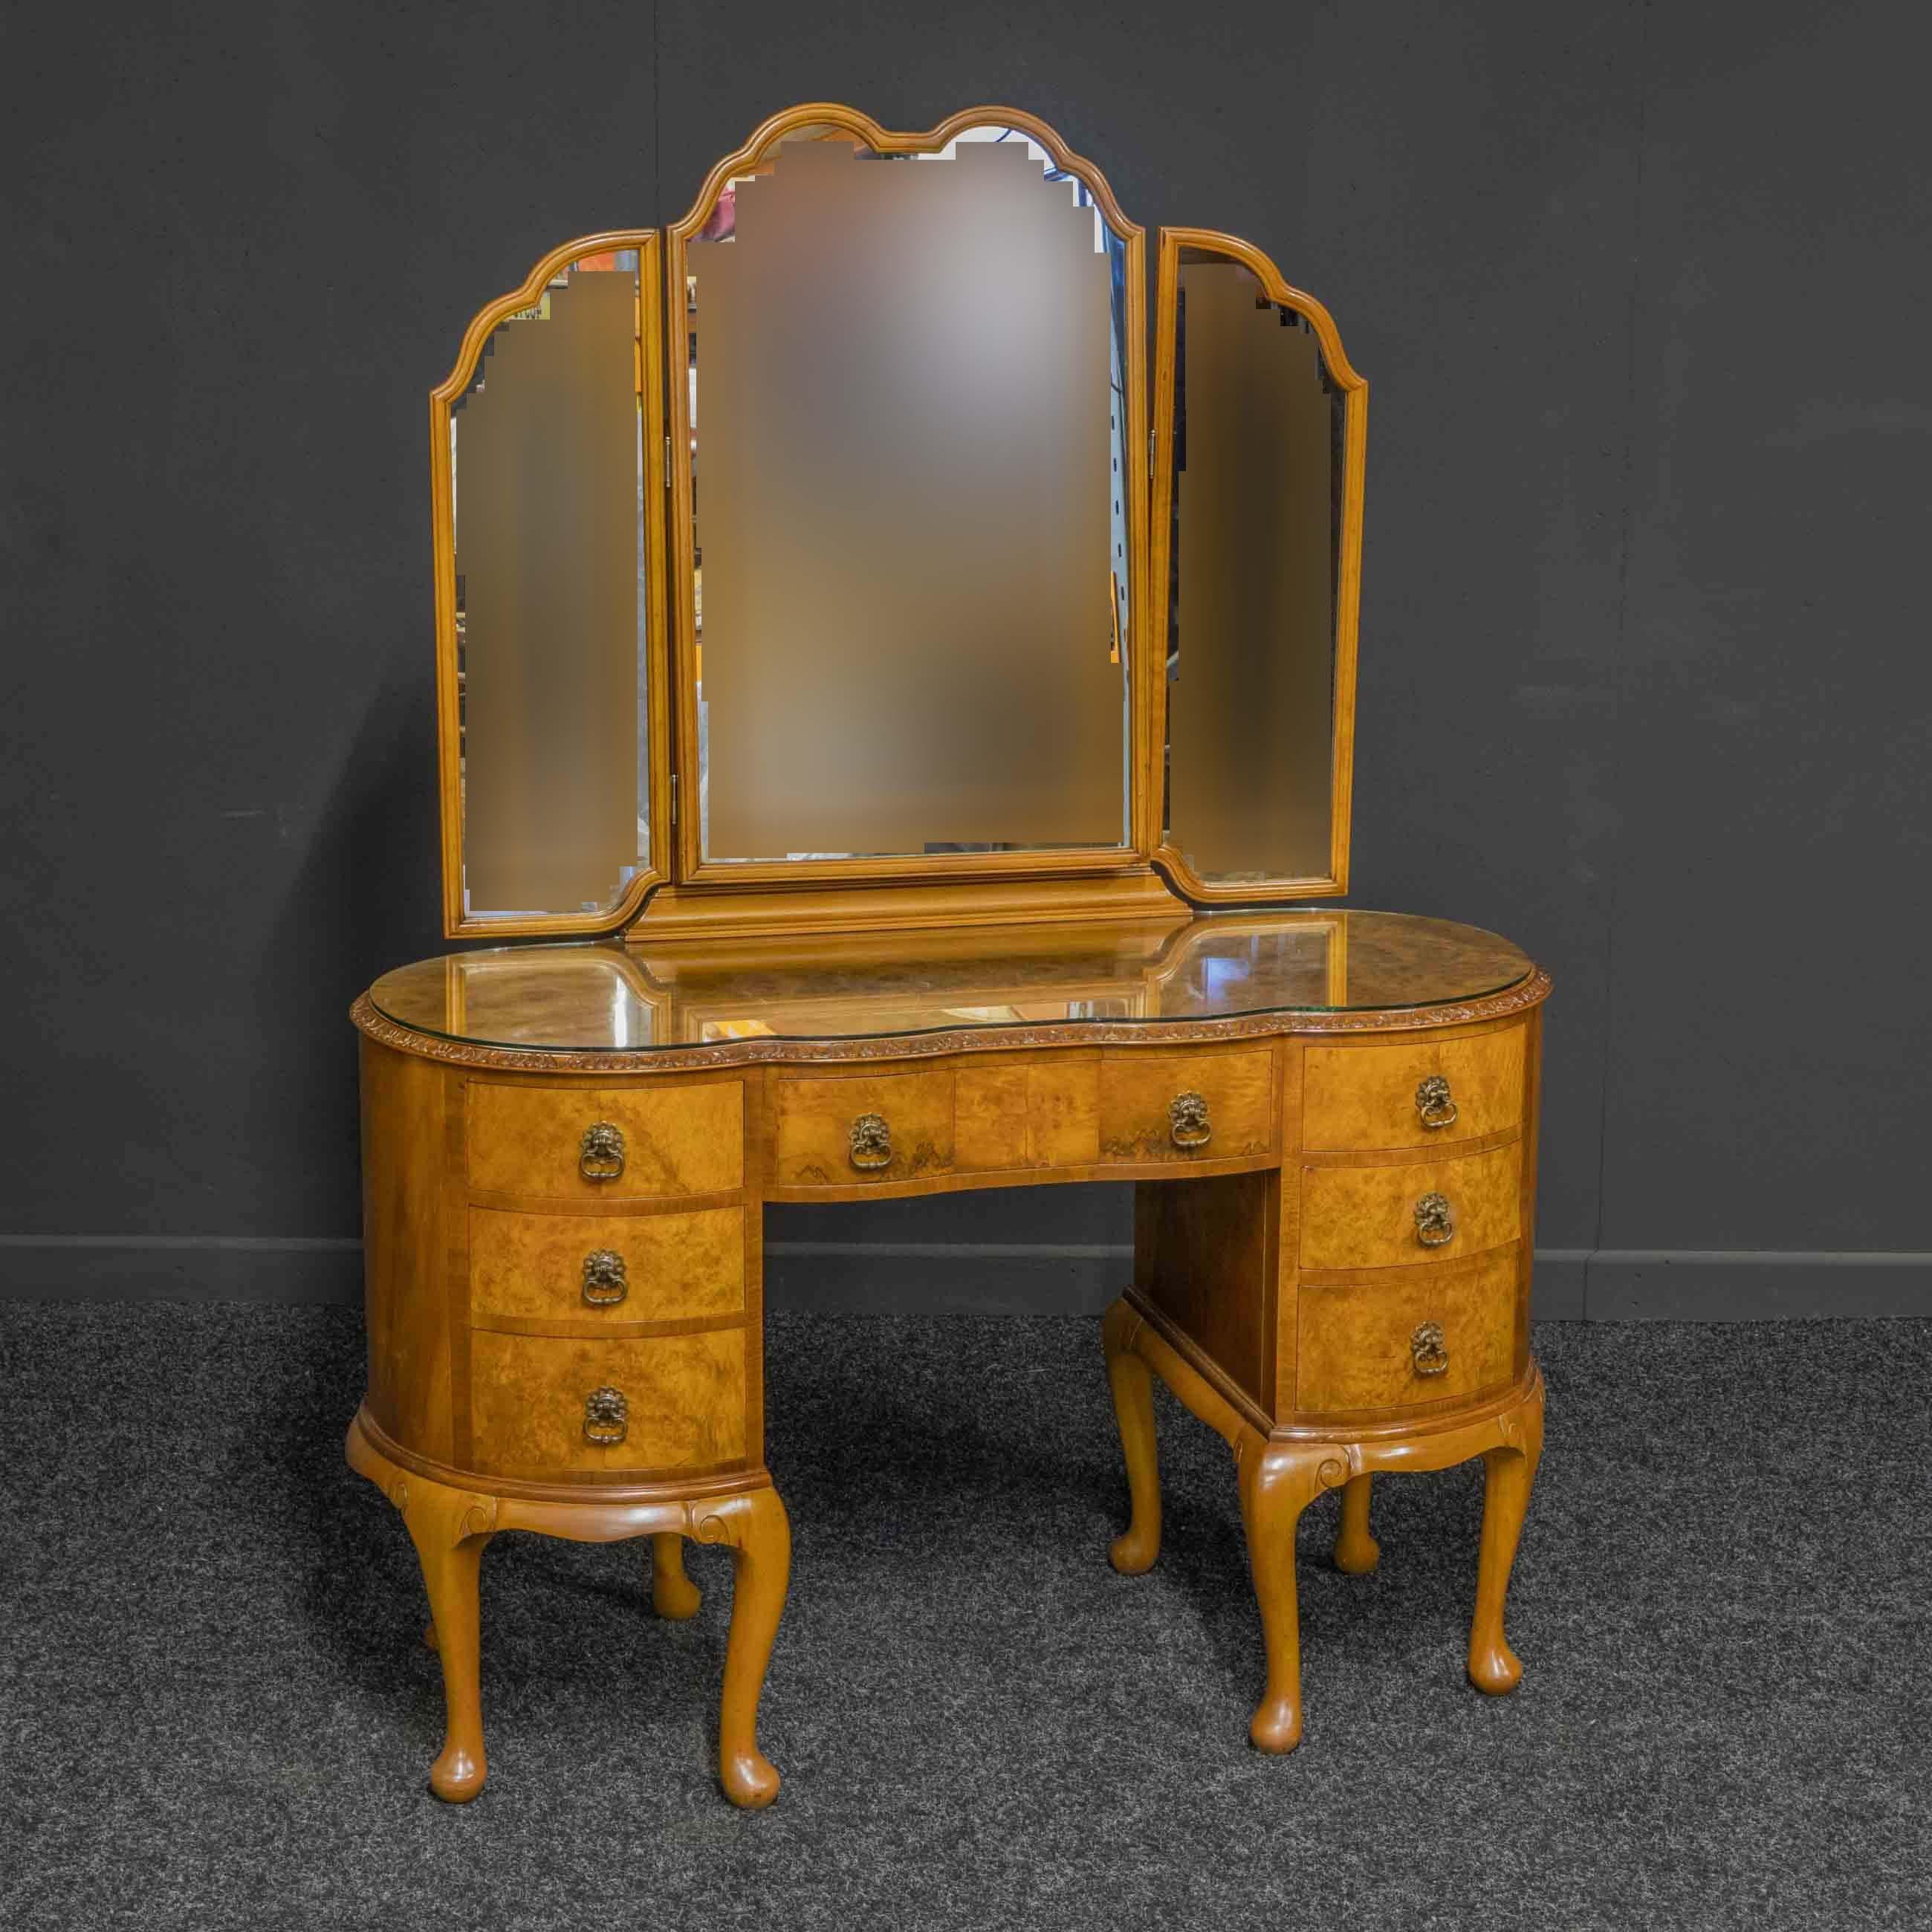 A very attractive walnut veneered dressing table with a very shapely design. Although of delicate appearance it is very sturdy, with eight legs in total. All the original cast brass drop handles are present and the drawers run smoothly. The triple